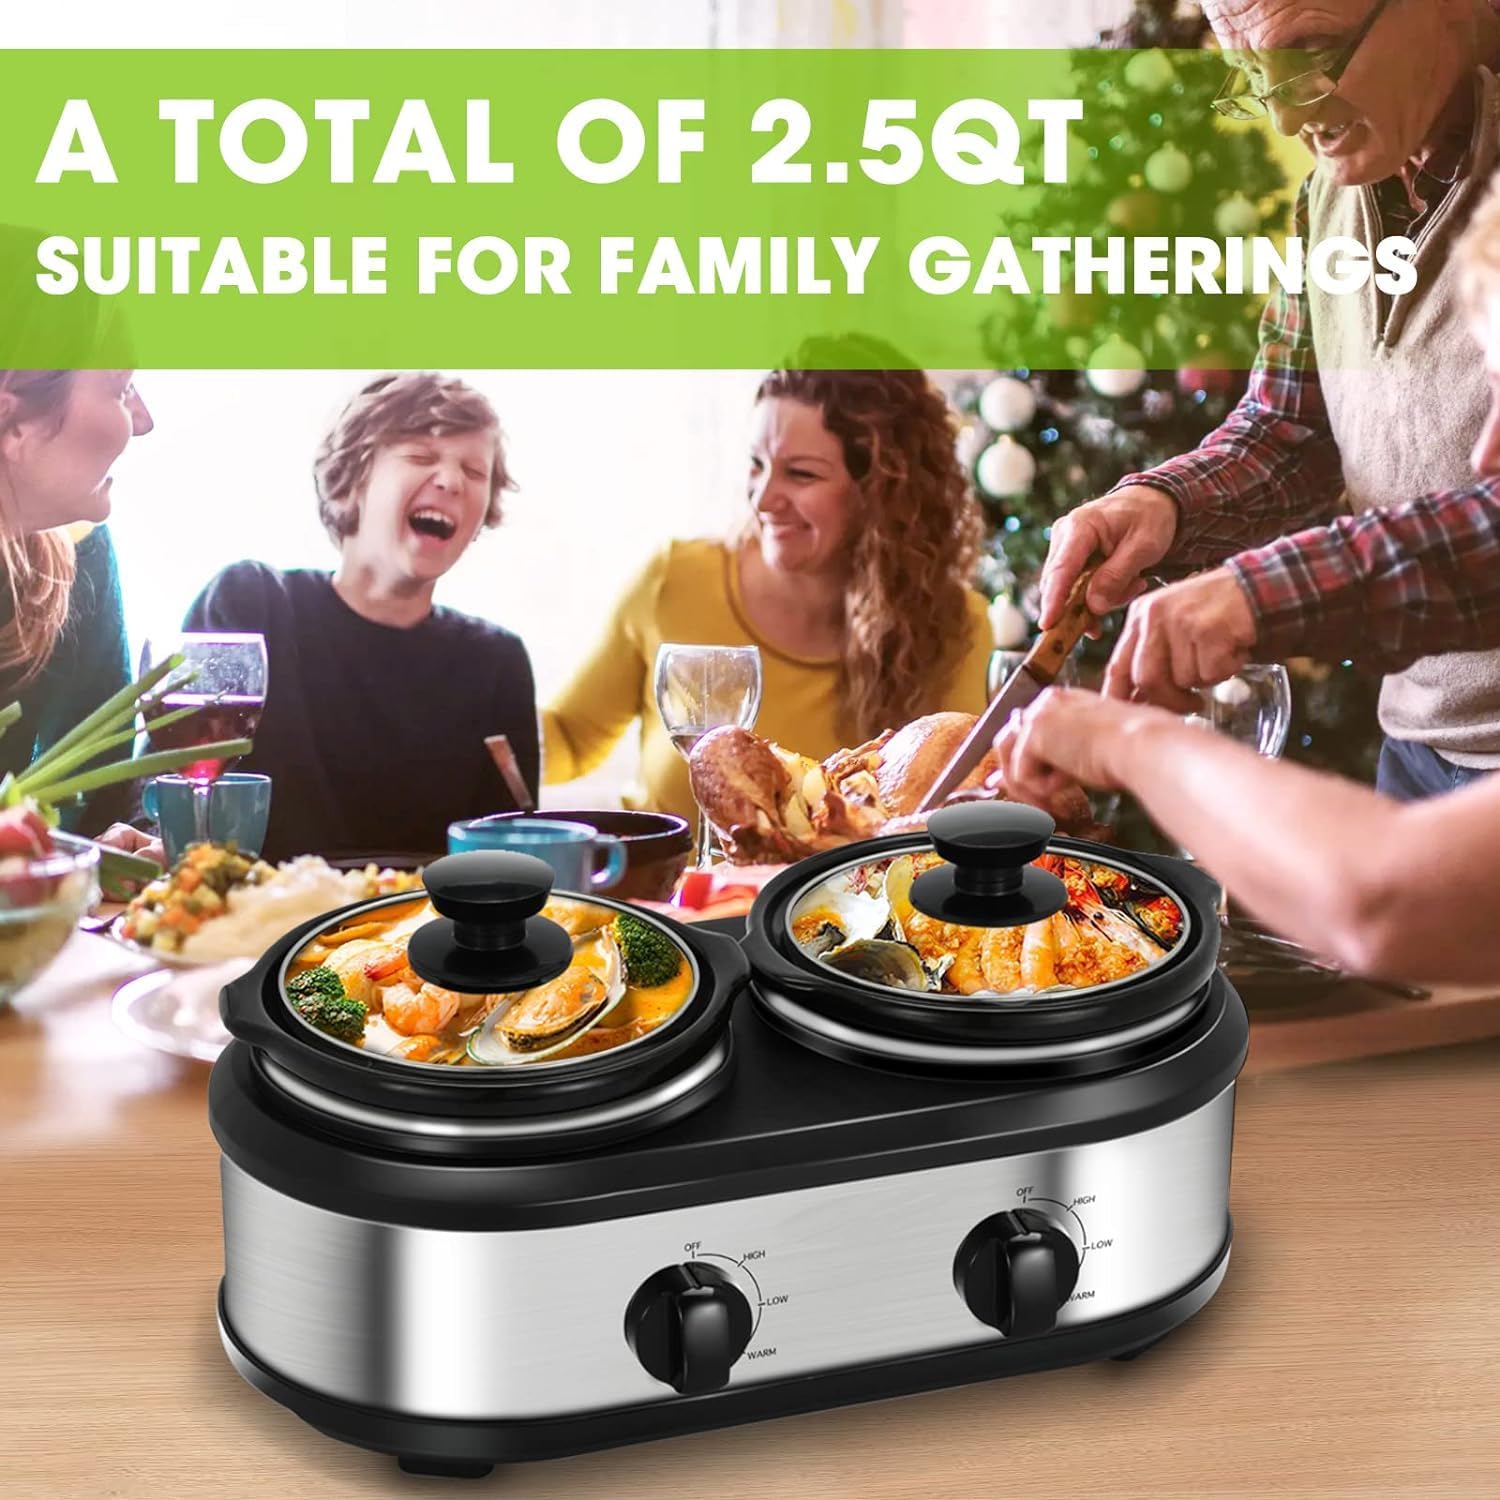 Triple Slow Cooker, Buffet Server Food Warmer, 3 * 1.5QT Slow Cooker with Ceramic Pot, 3 Modes Adjustable Temp, Dishwasher Safe, Removeable Glass Lid and 3 PVC Spoons,Stainless Steel